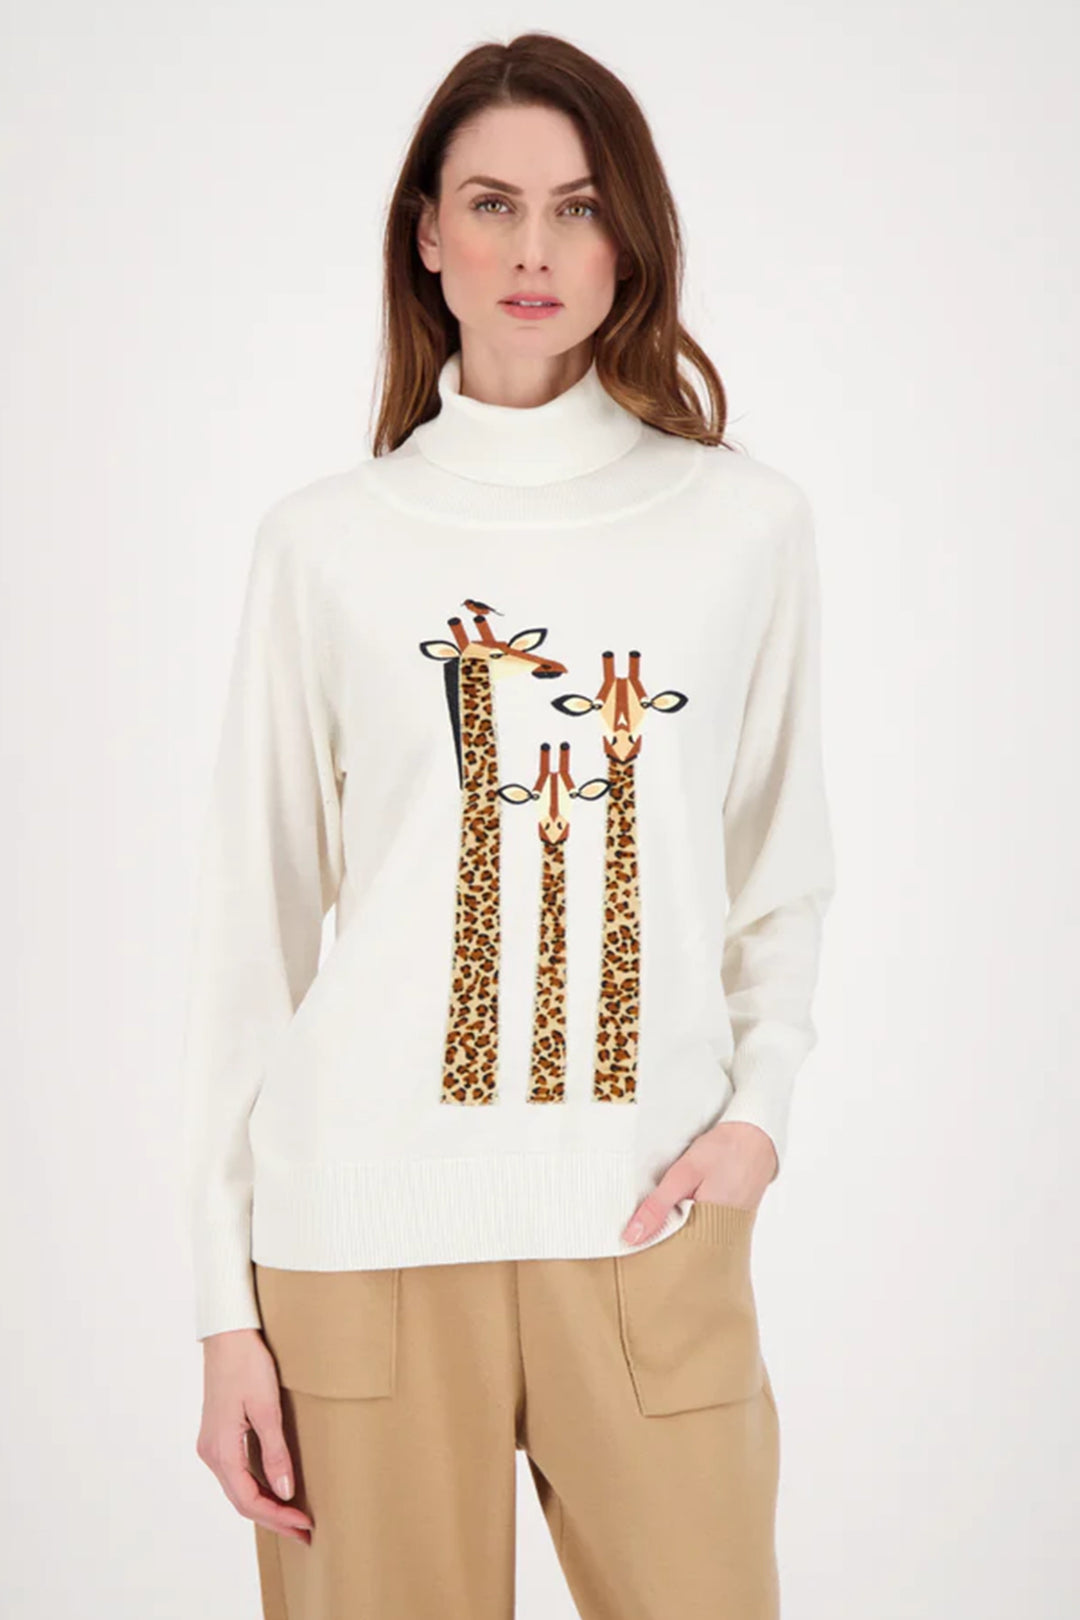 Featuring a light sweater style with a twist-a playful turtle neck line adorned with 3 giraffes! 